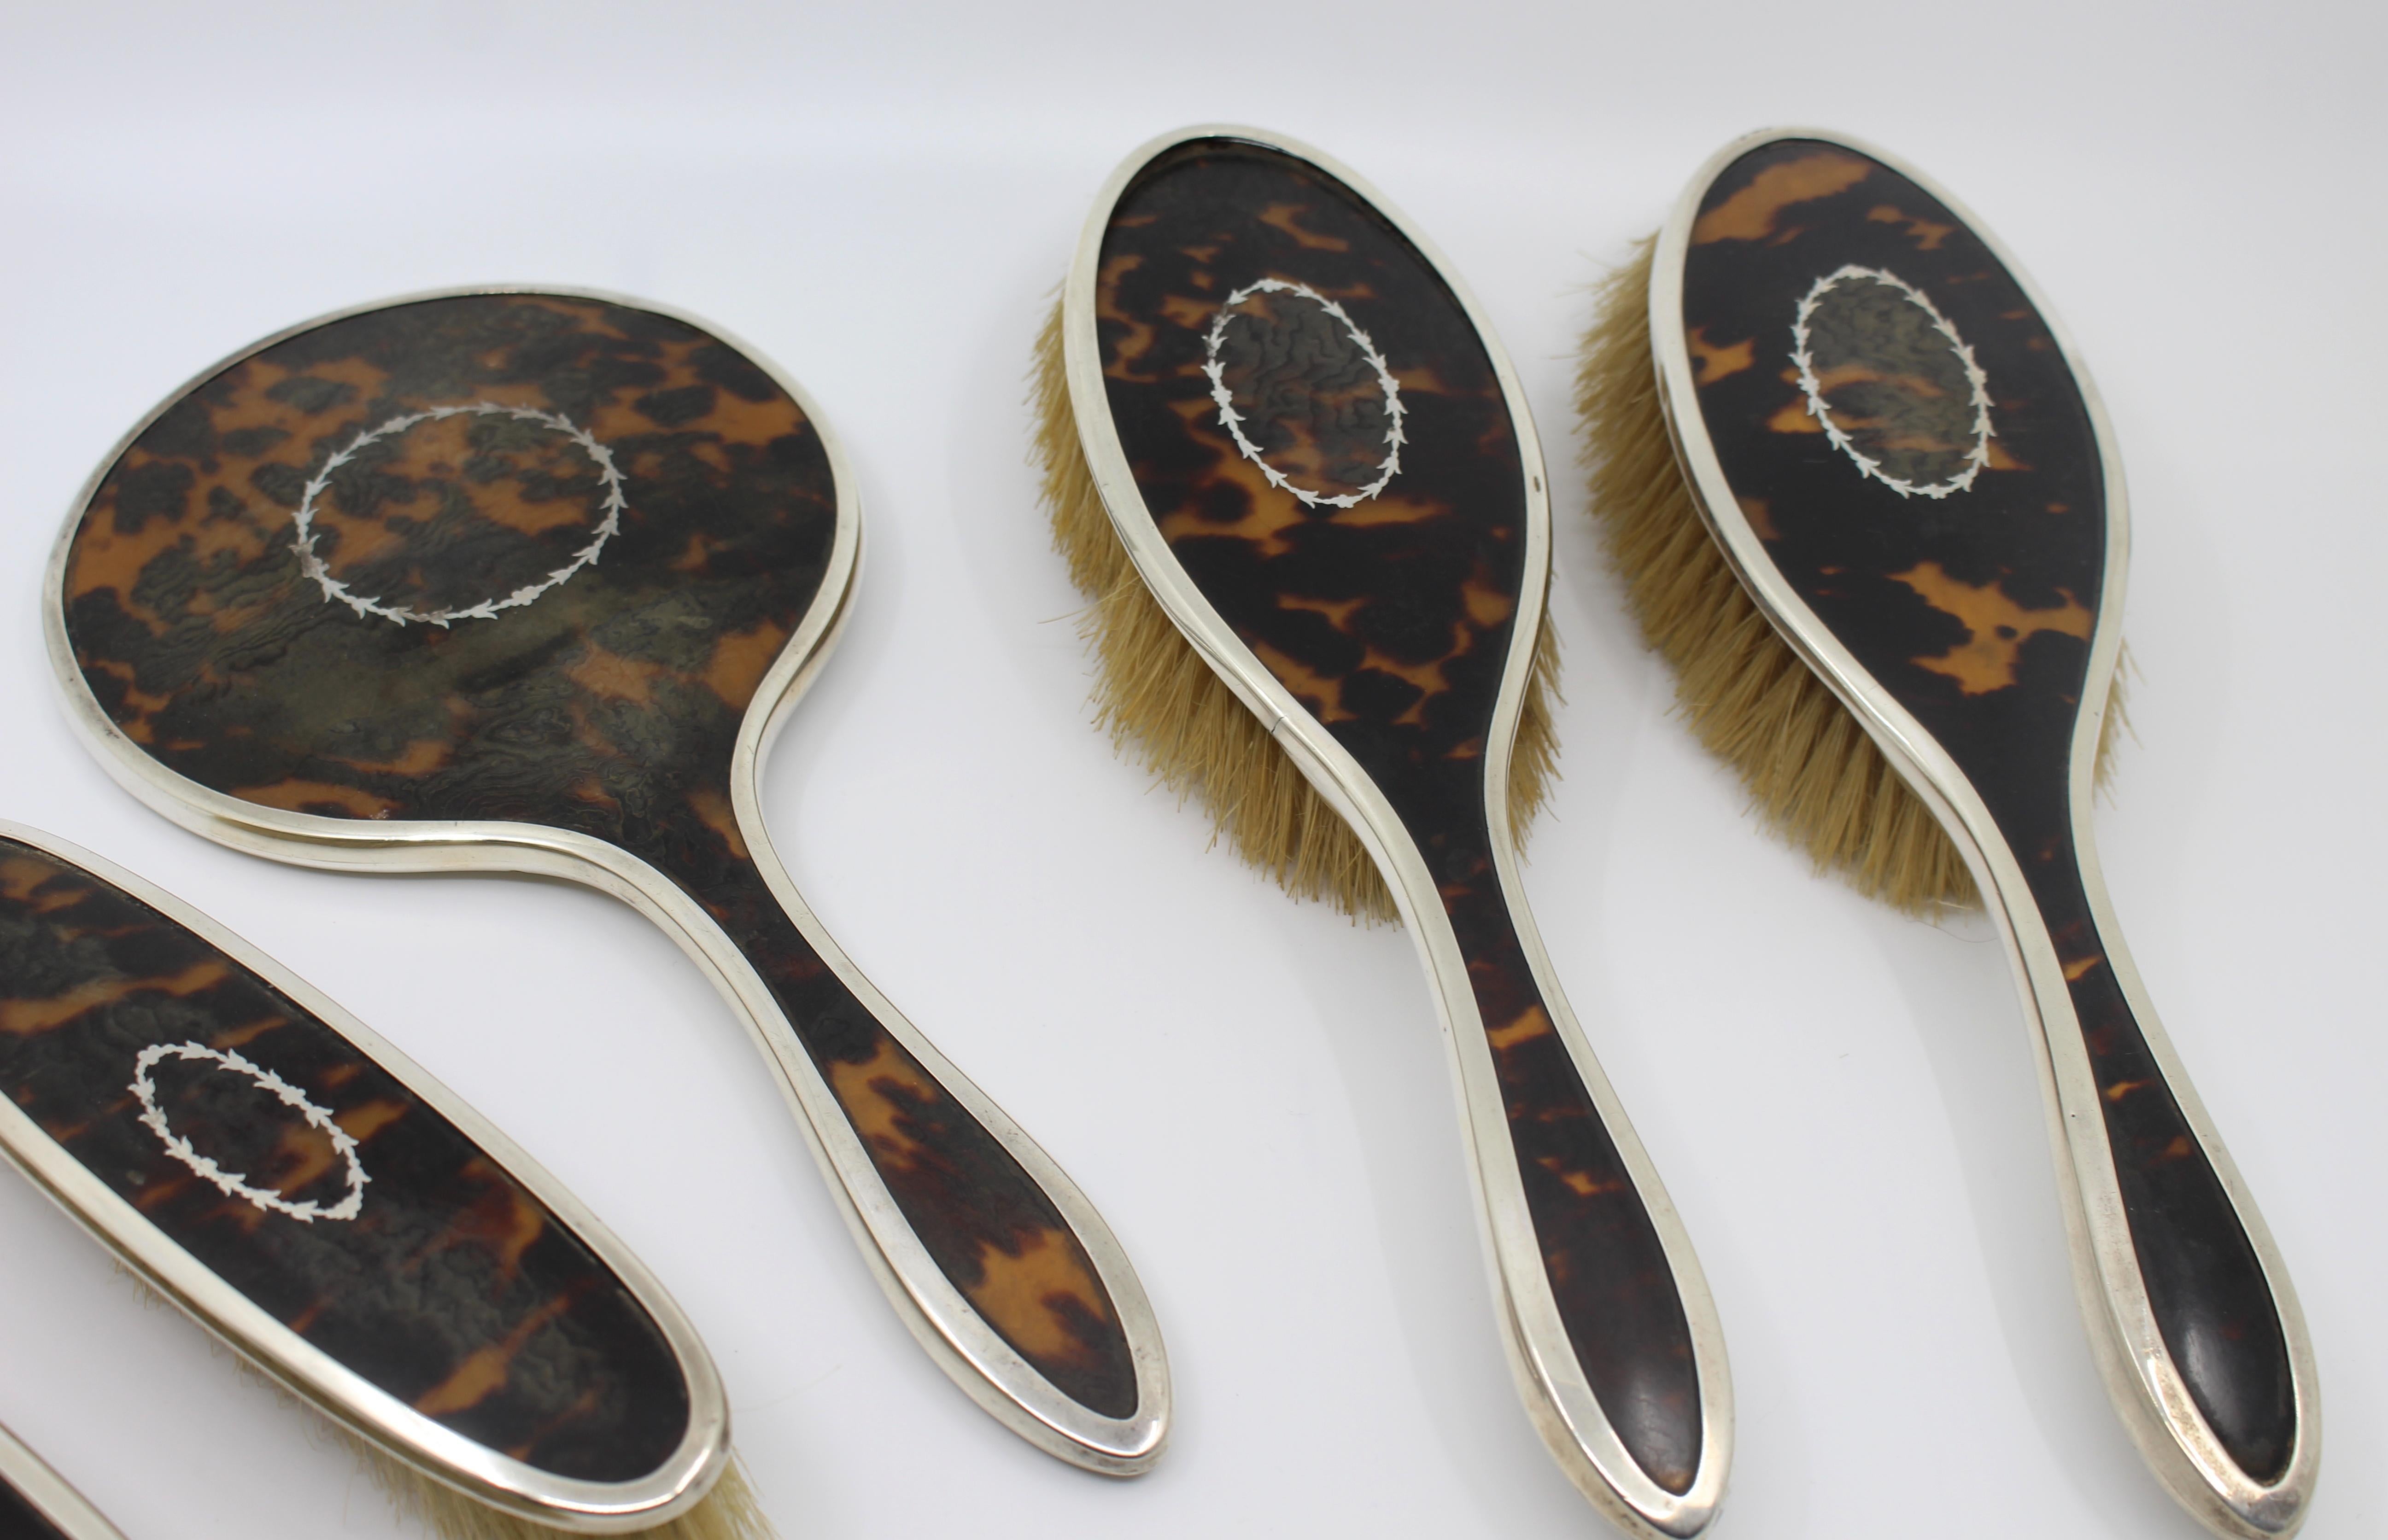 20th Century English Five-Piece Silver and Tortoiseshell Vanity Toilet Brush Set, 1923 For Sale